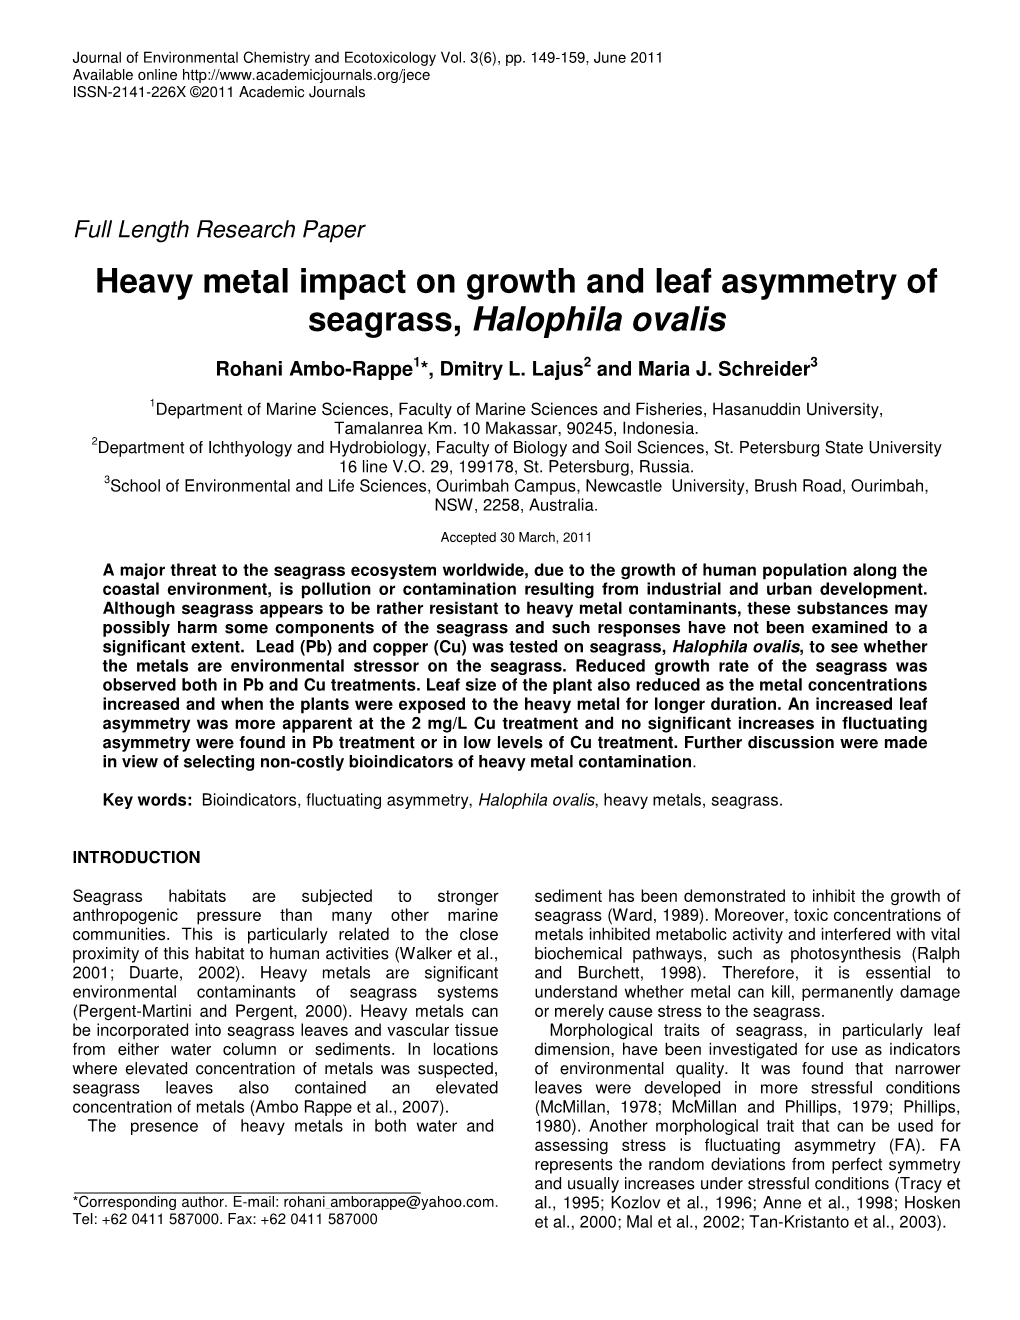 Heavy Metal Impact on Growth and Leaf Asymmetry of Seagrass, Halophila Ovalis